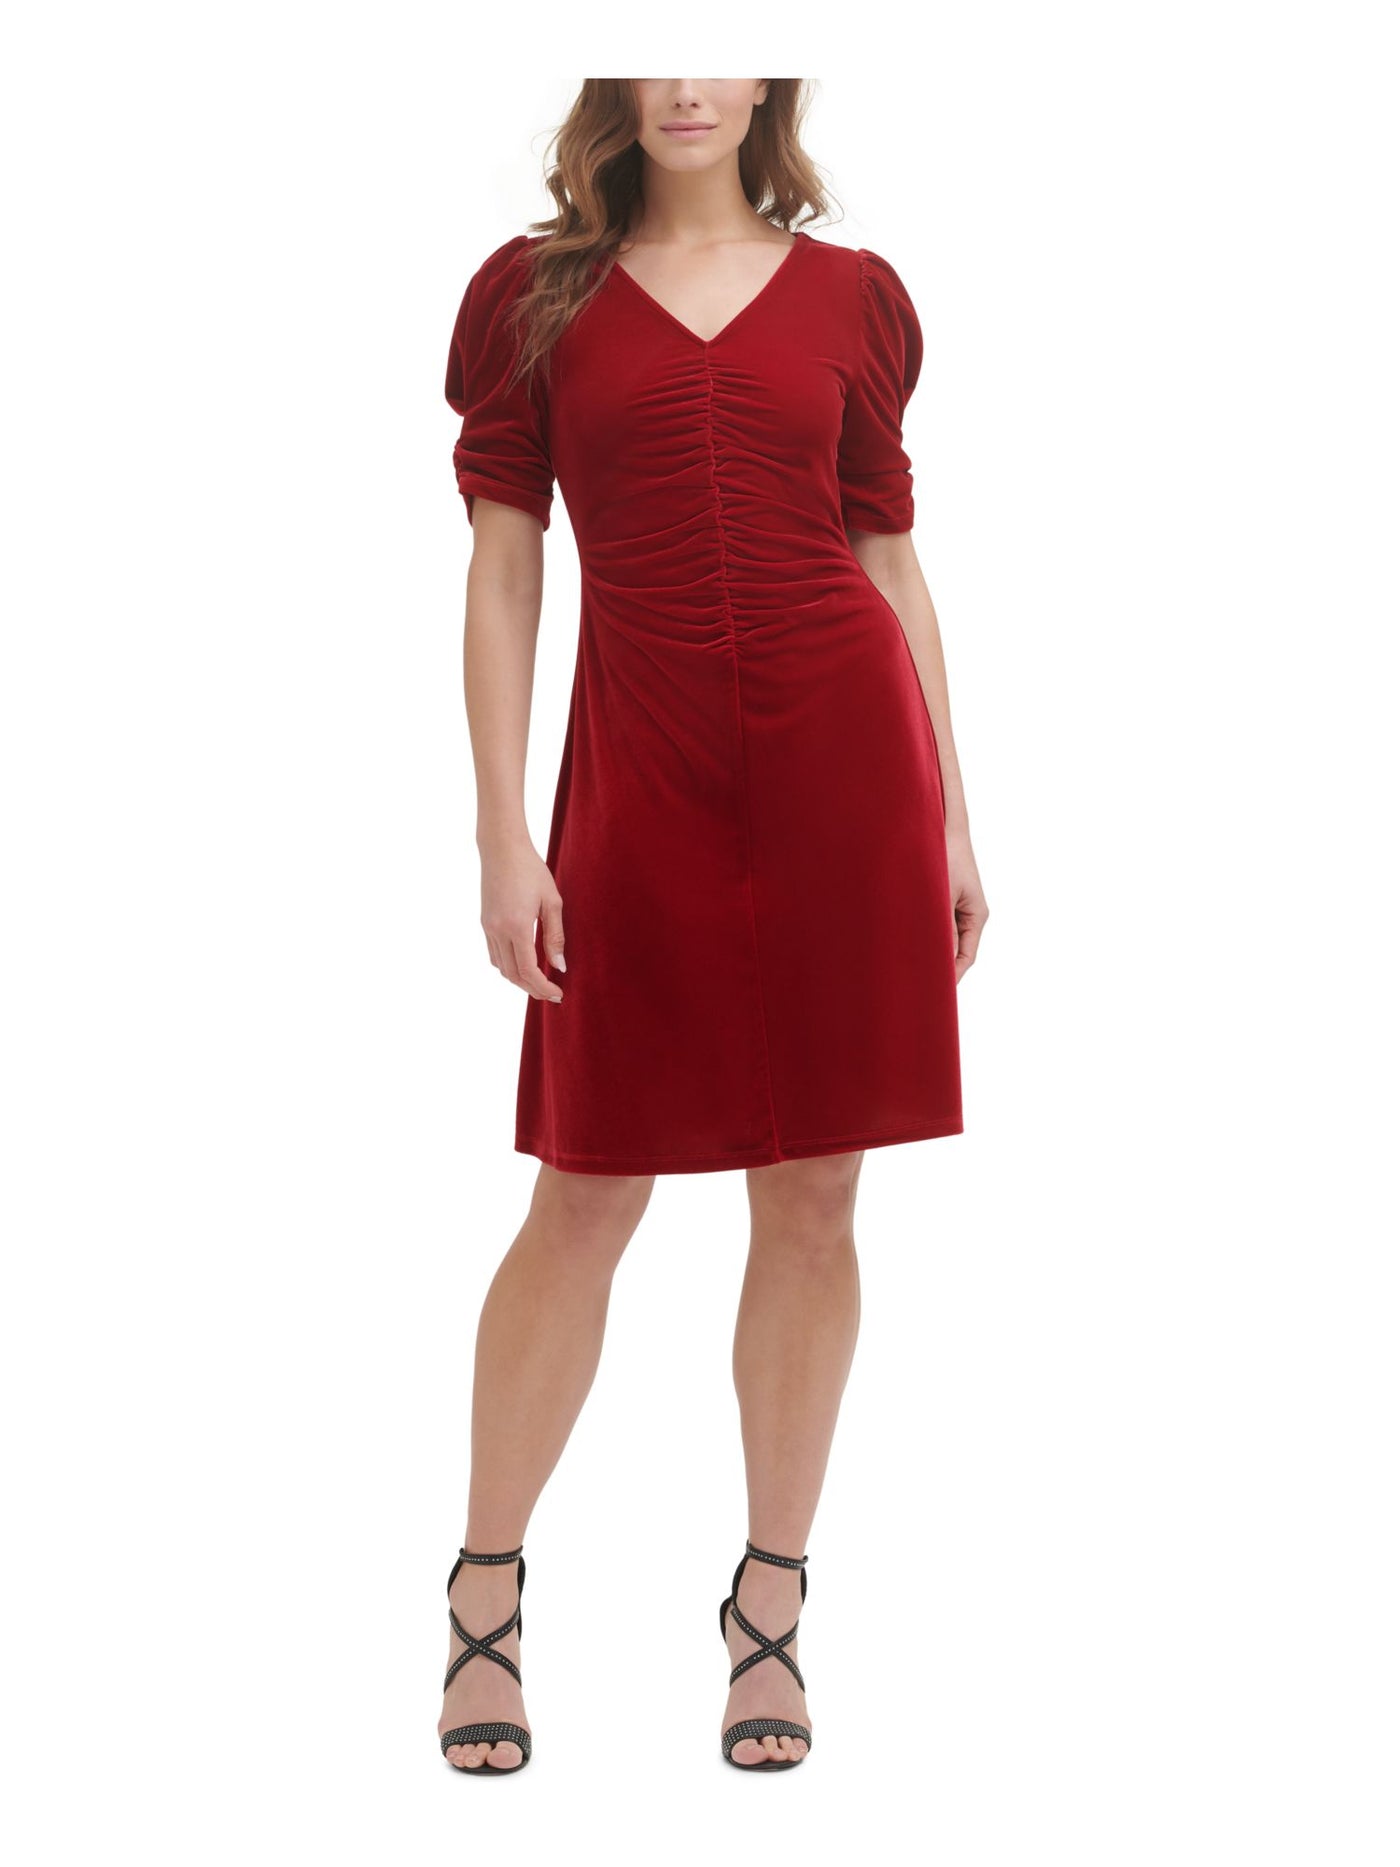 DKNY Womens Red Ruched Zippered Velvet Textured Pouf Sleeve V Neck Knee Length Party Sheath Dress 8